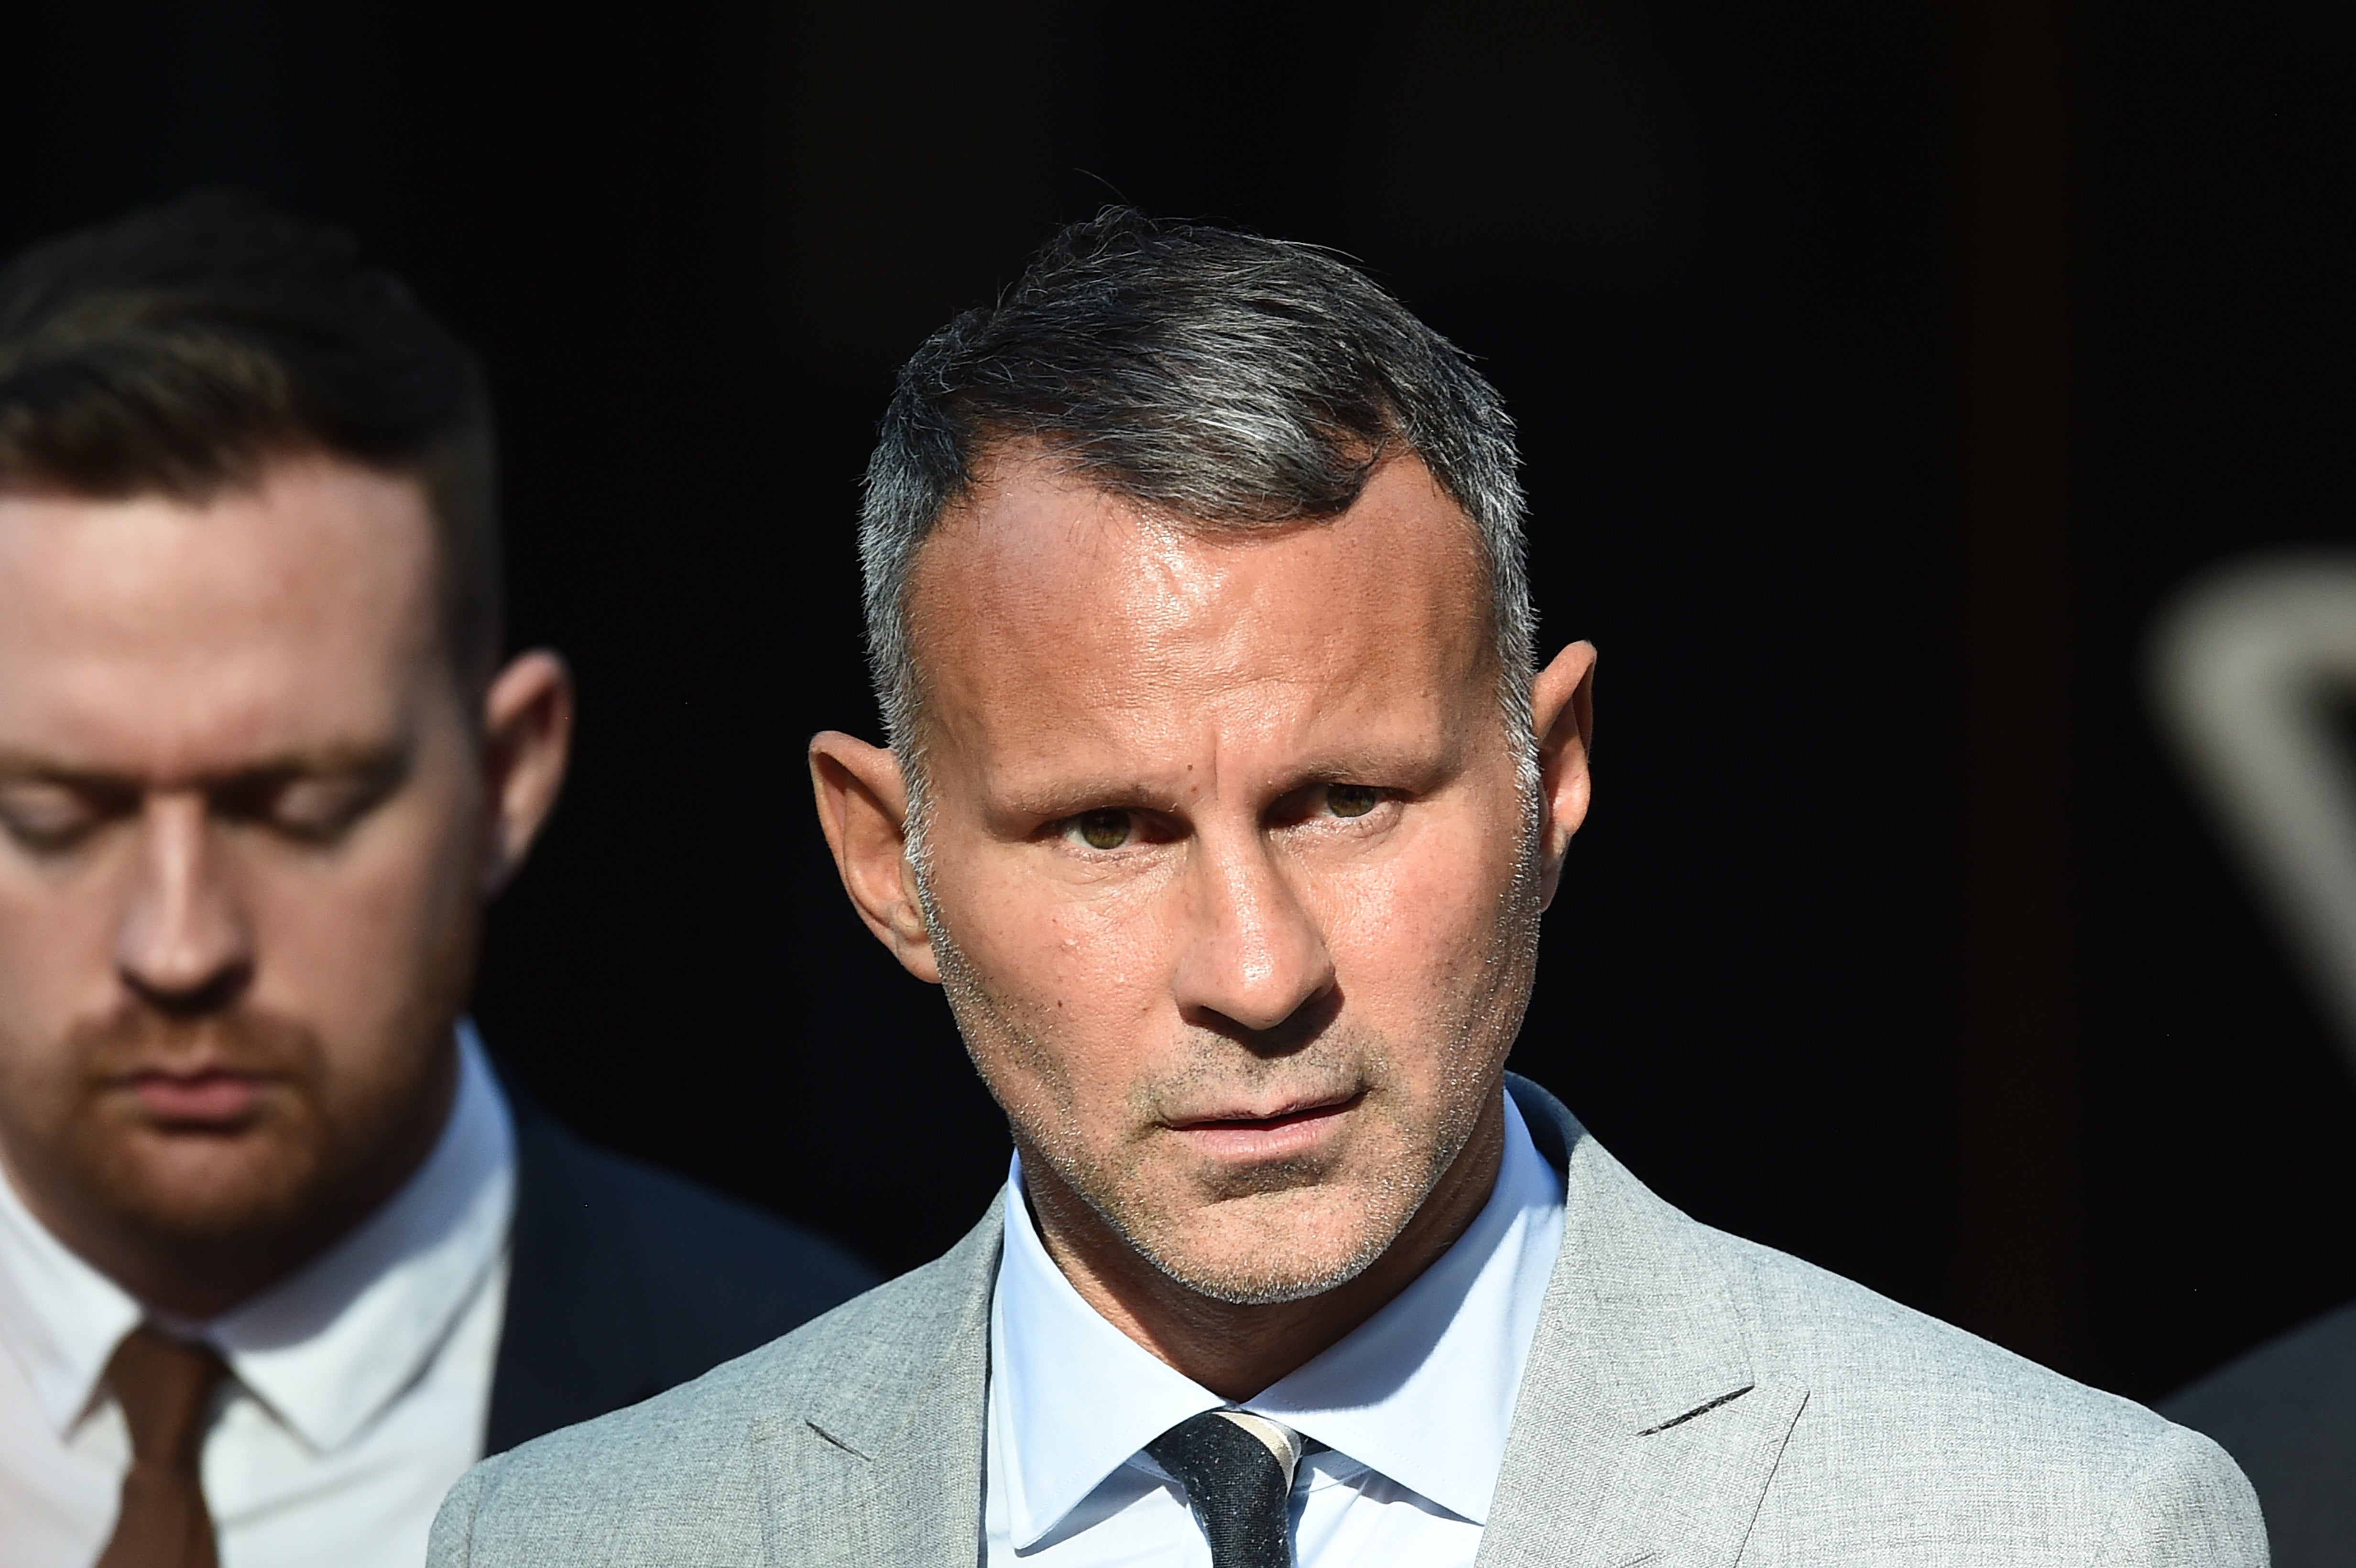 Former Manchester United footballer Ryan Giggs leaving Manchester Crown Court where he is accused of controlling and coercive behaviour against ex-girlfriend Kate Greville between August 2017 and November 2020. Picture date: Tuesday August 9, 2022.